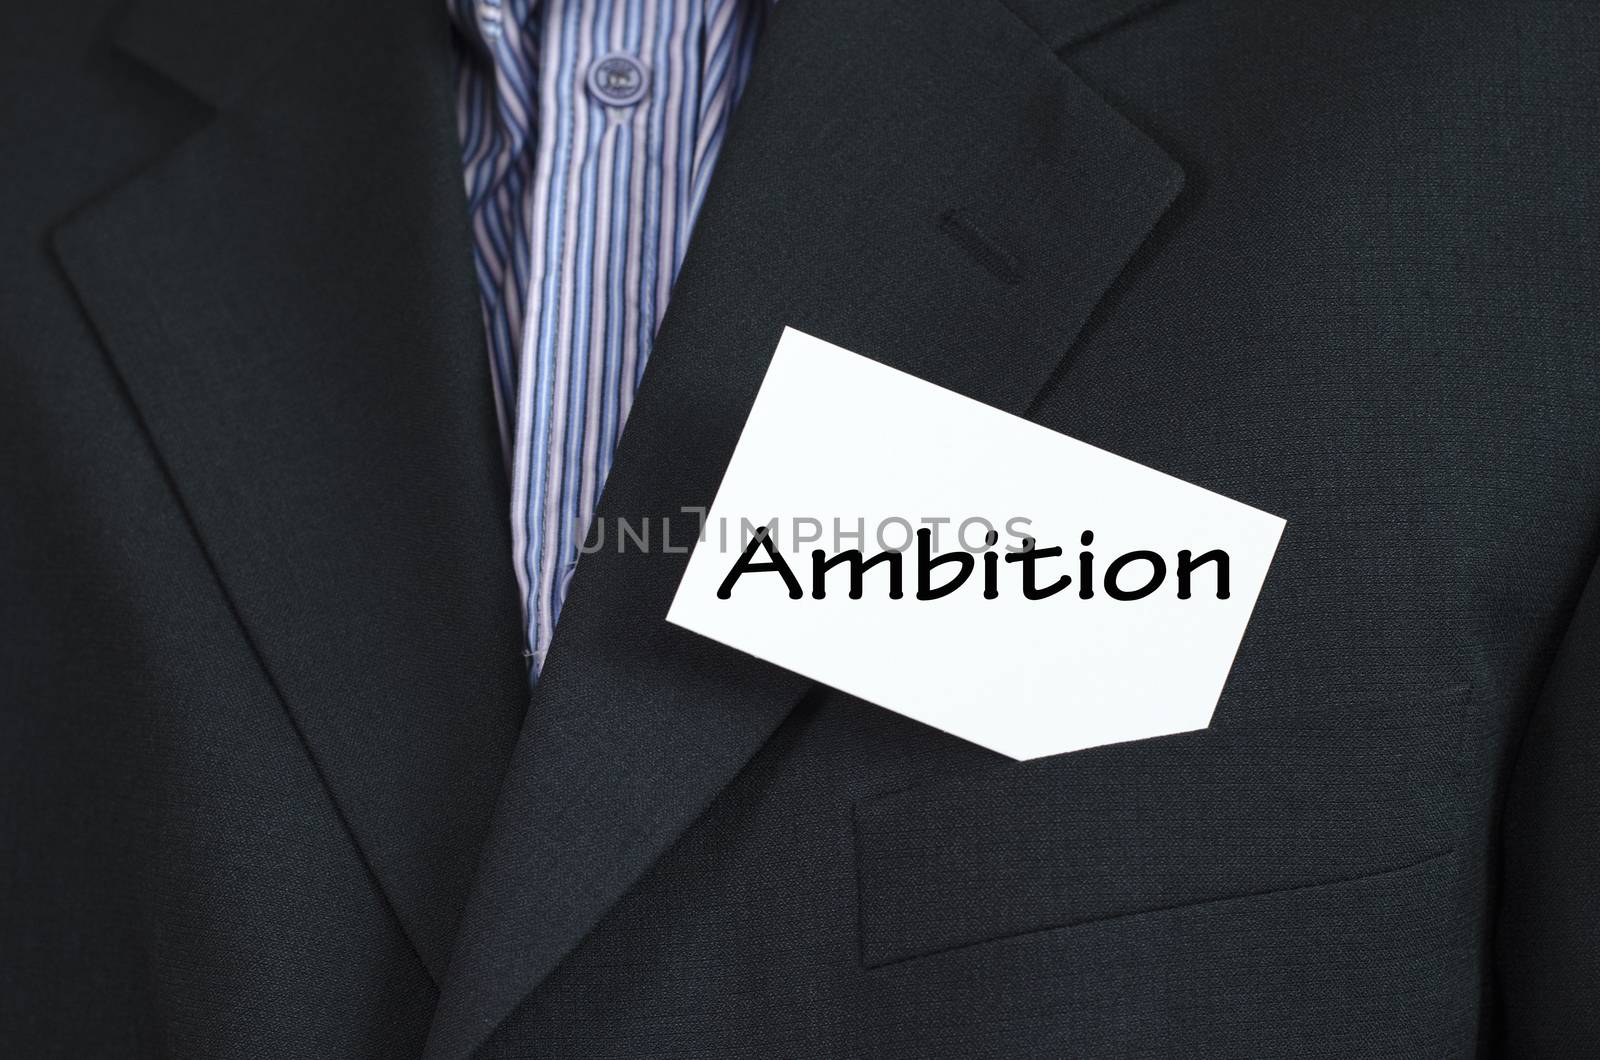 Ambition text note concept over business man background